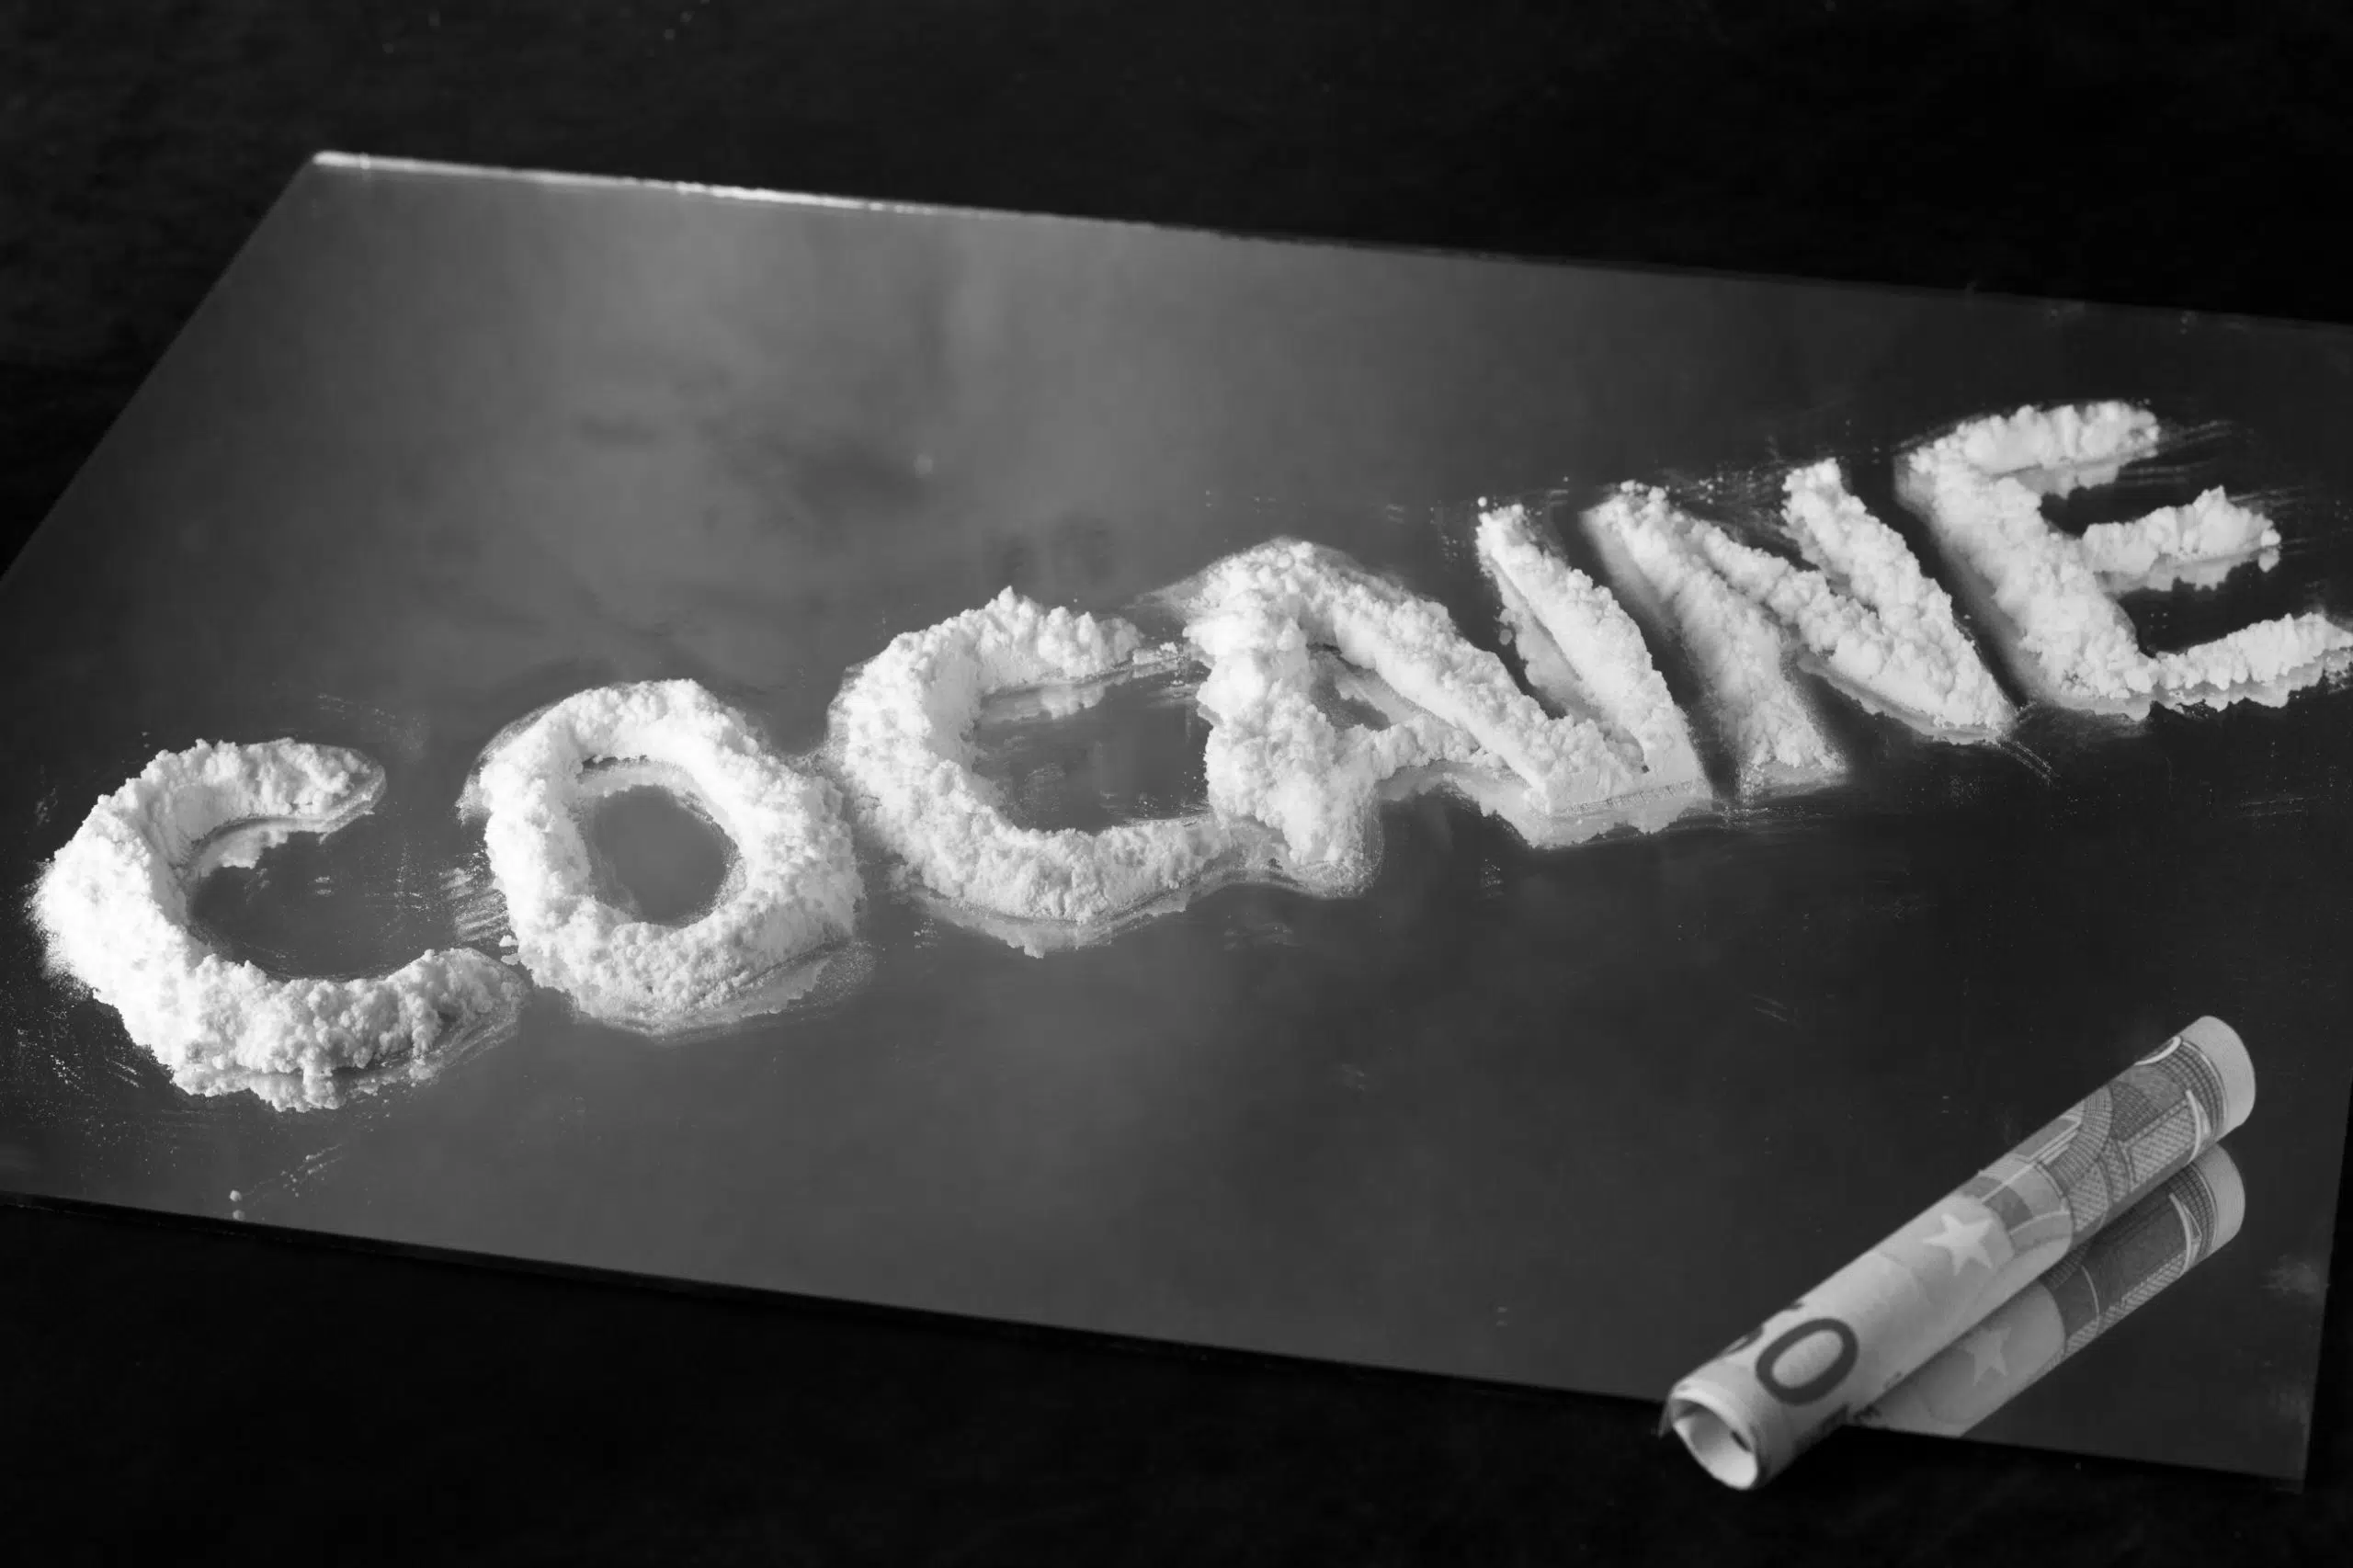 Cocaine charges laid in QW